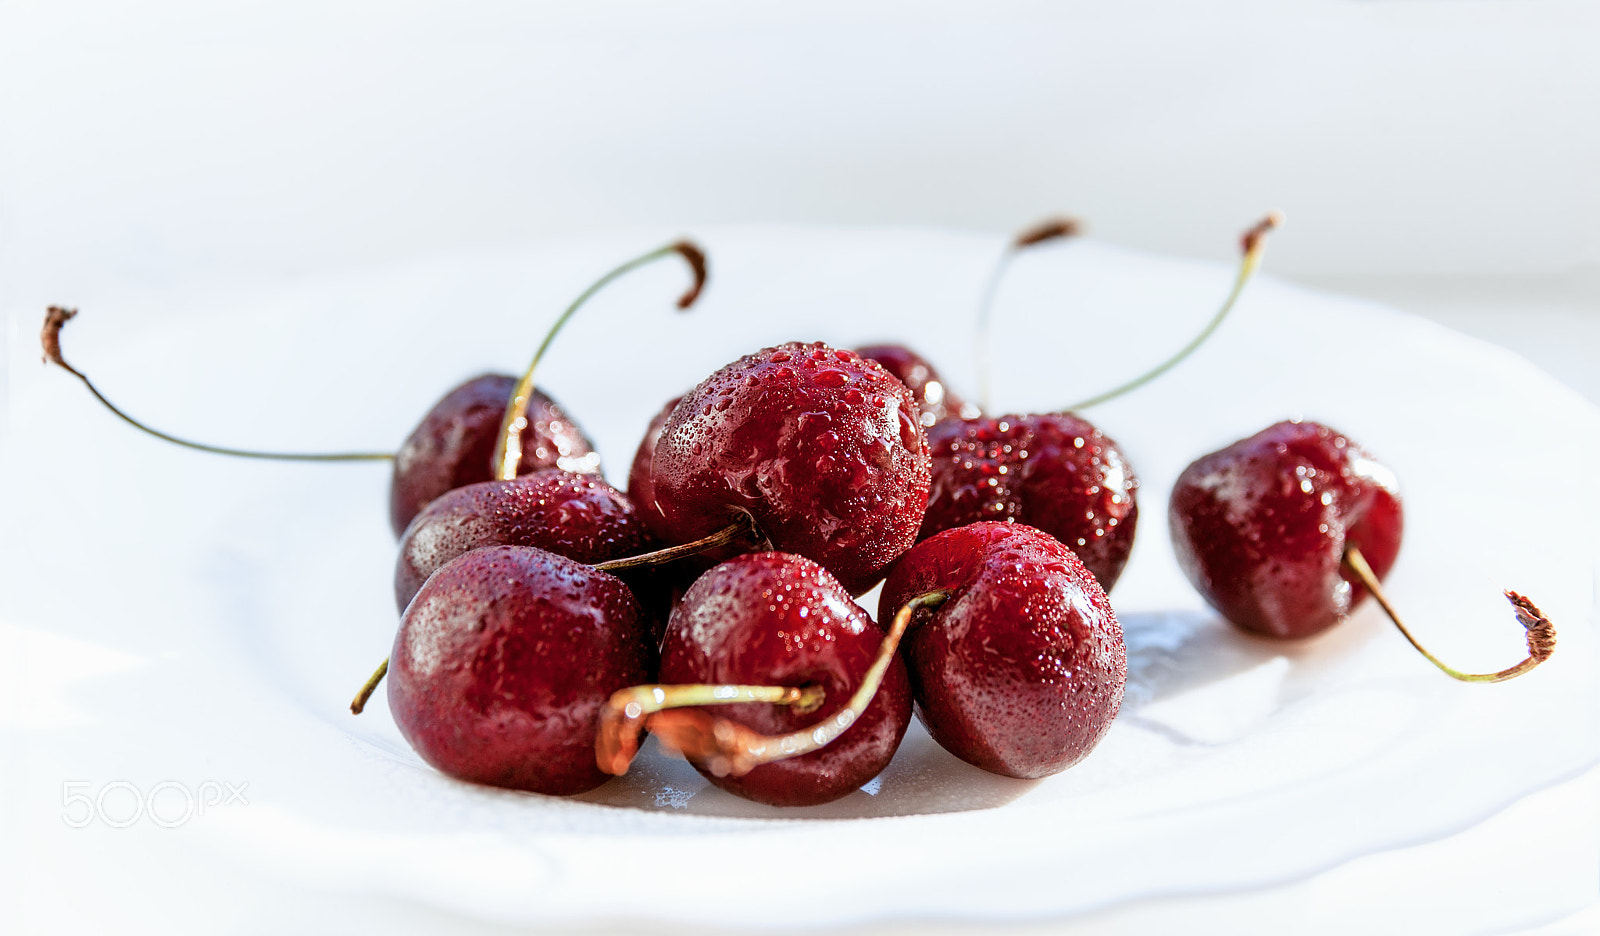 Nikon D700 sample photo. Wet cherries lying on a white plate on a light background photography